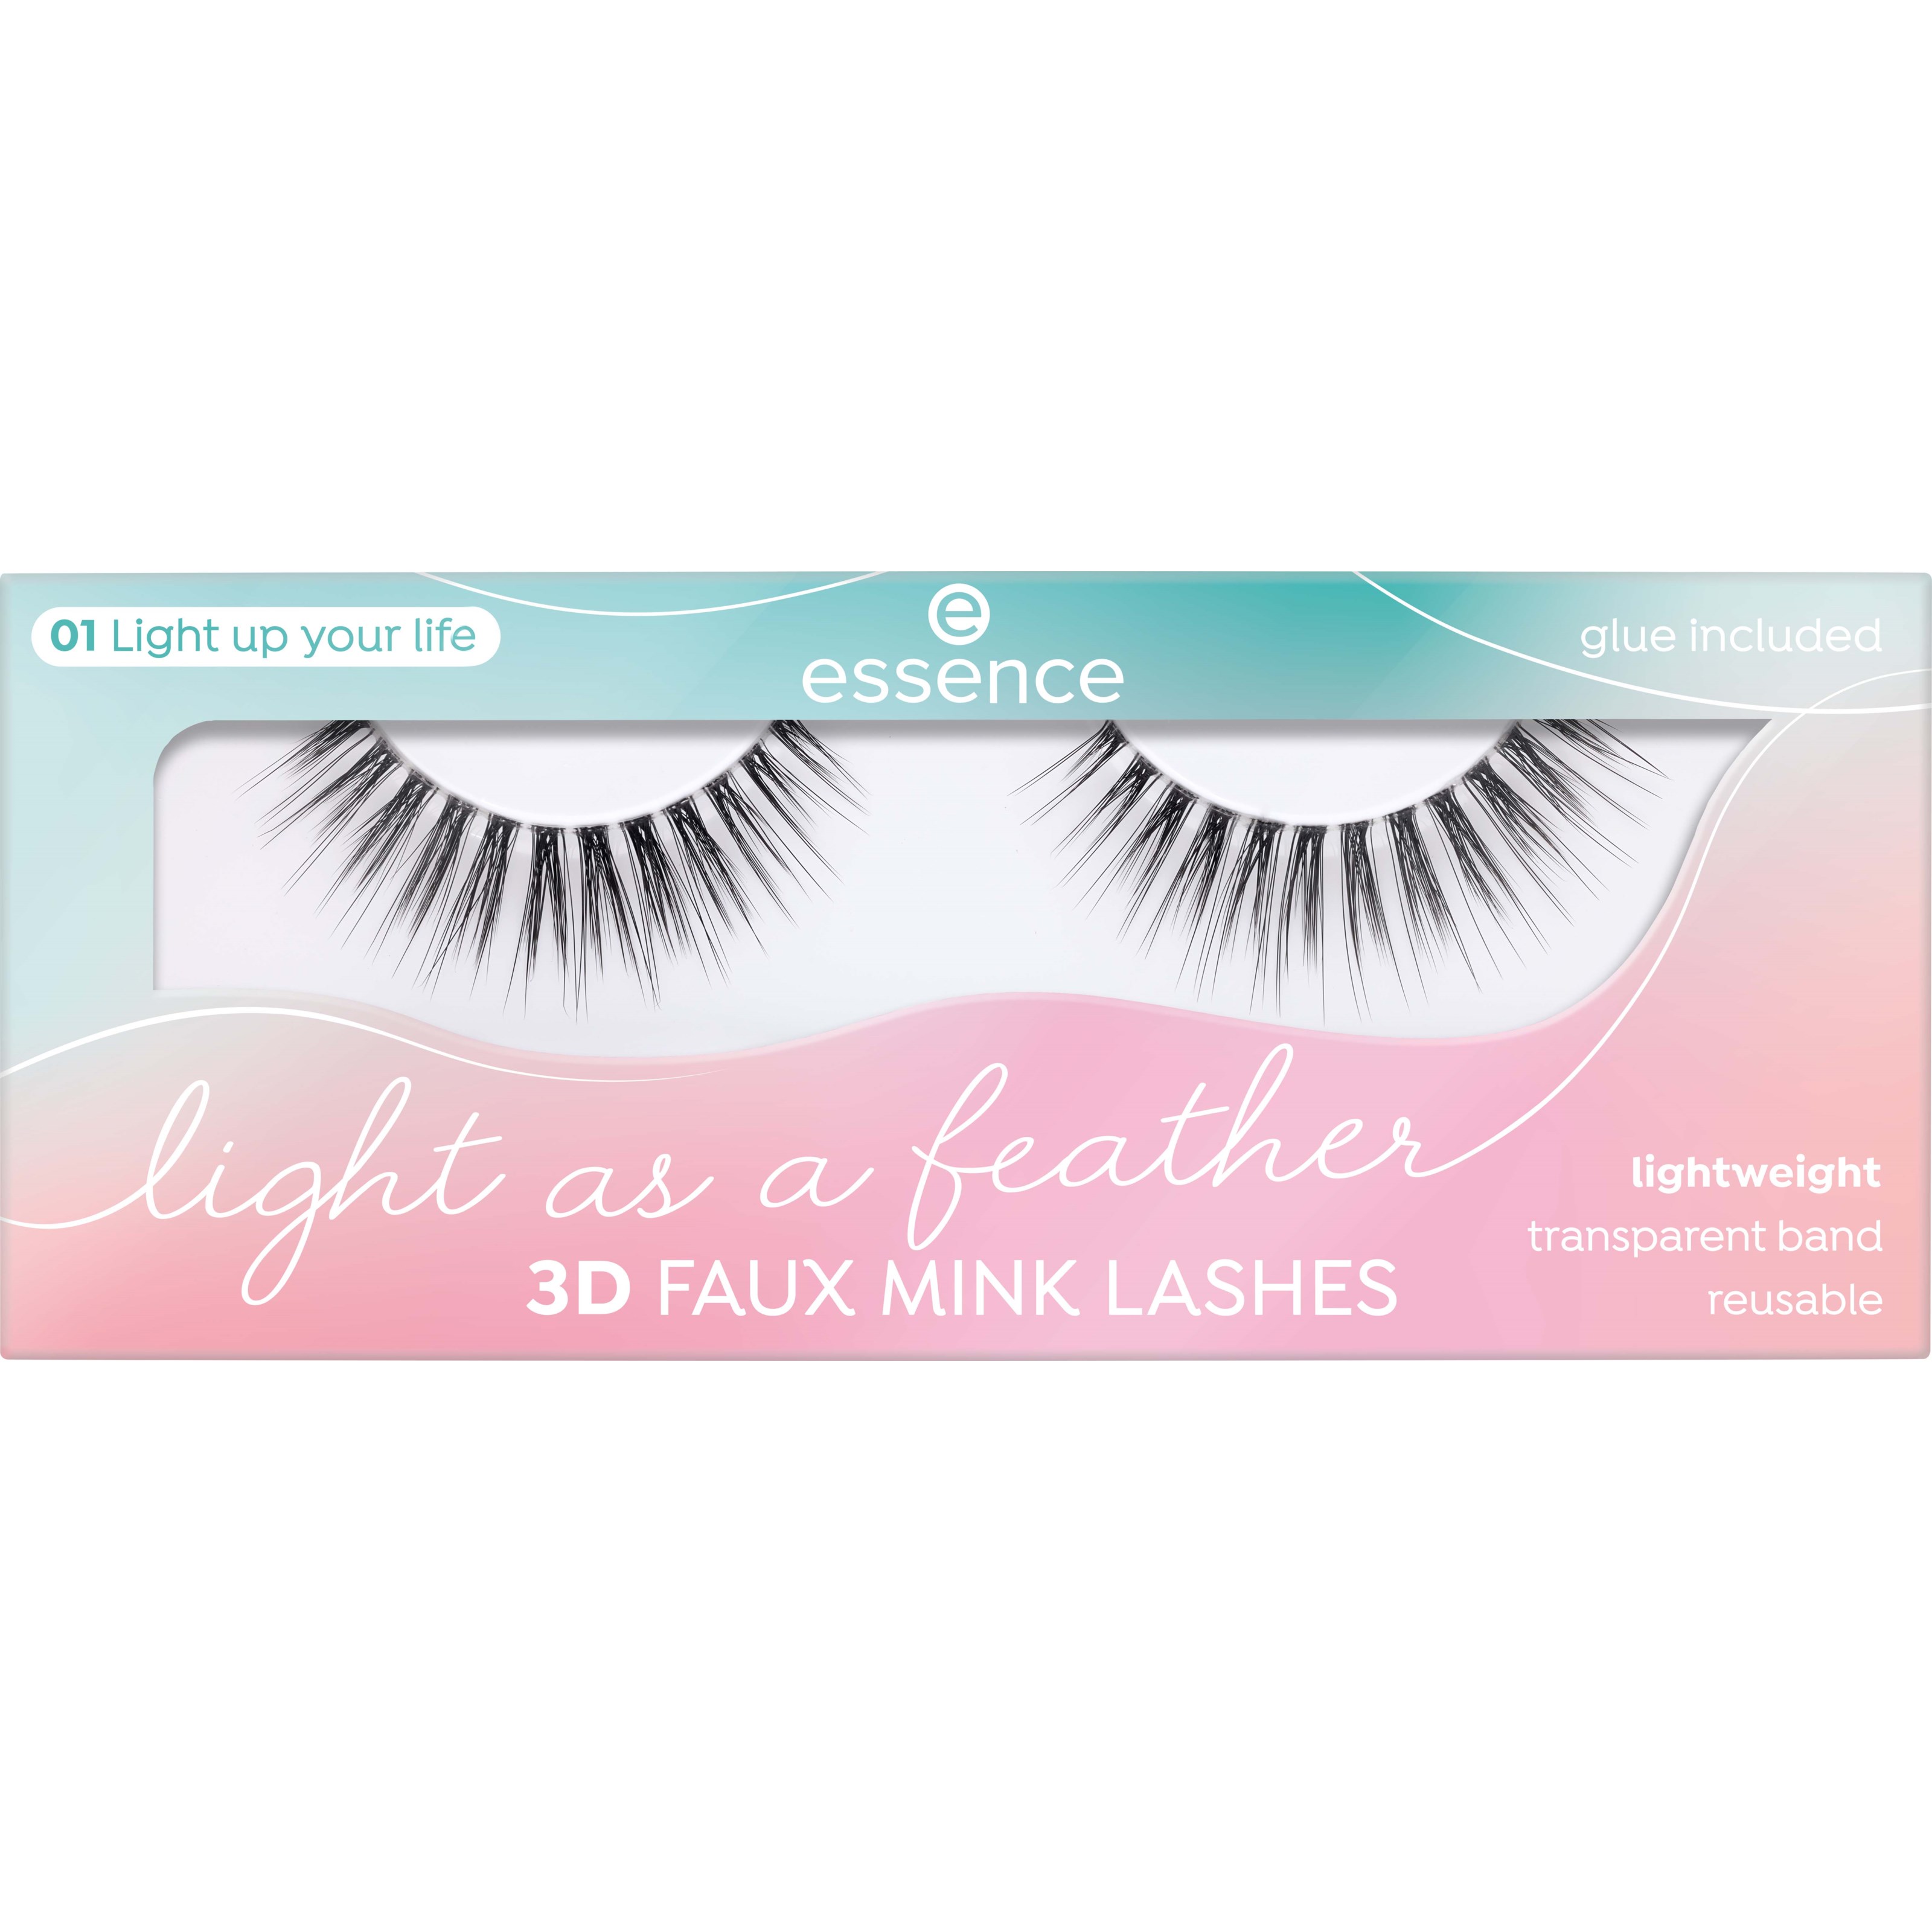 Läs mer om essence Light As A Feather 3D Faux Mink Lashes 01 Light up your life